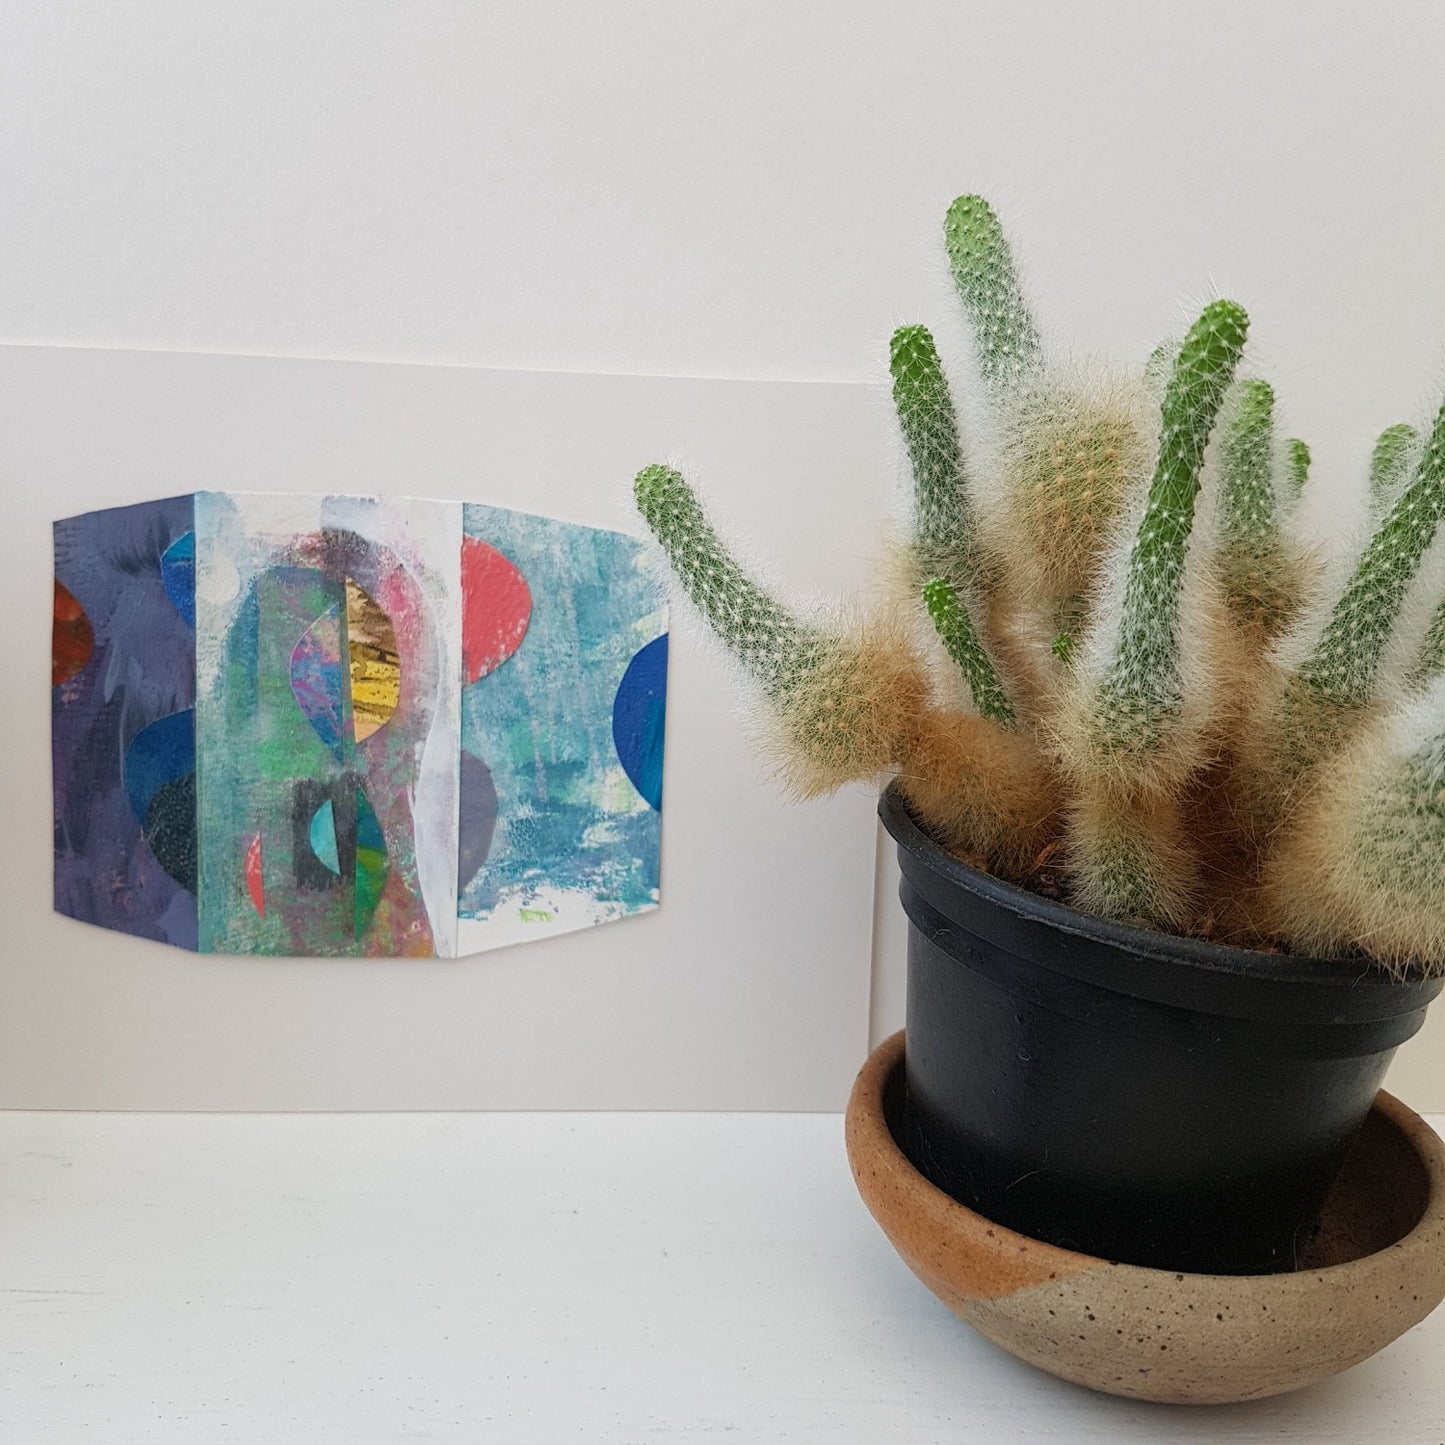 Mixed media paper collage on a shelf beside a potted cactus.